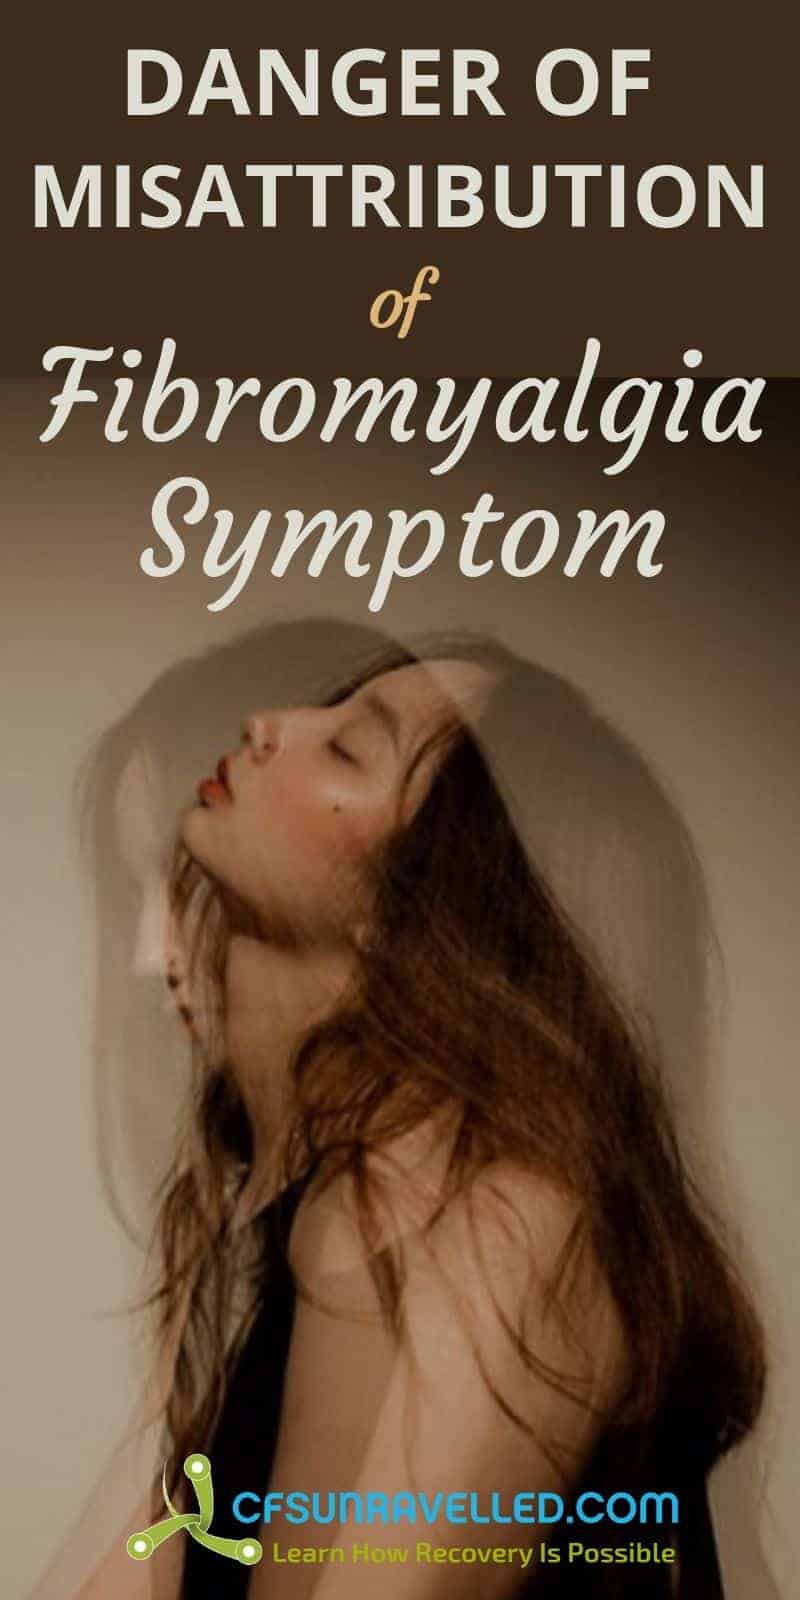 Image of woman blurred with headline about danger of misattribution of fibromyalgia symptoms